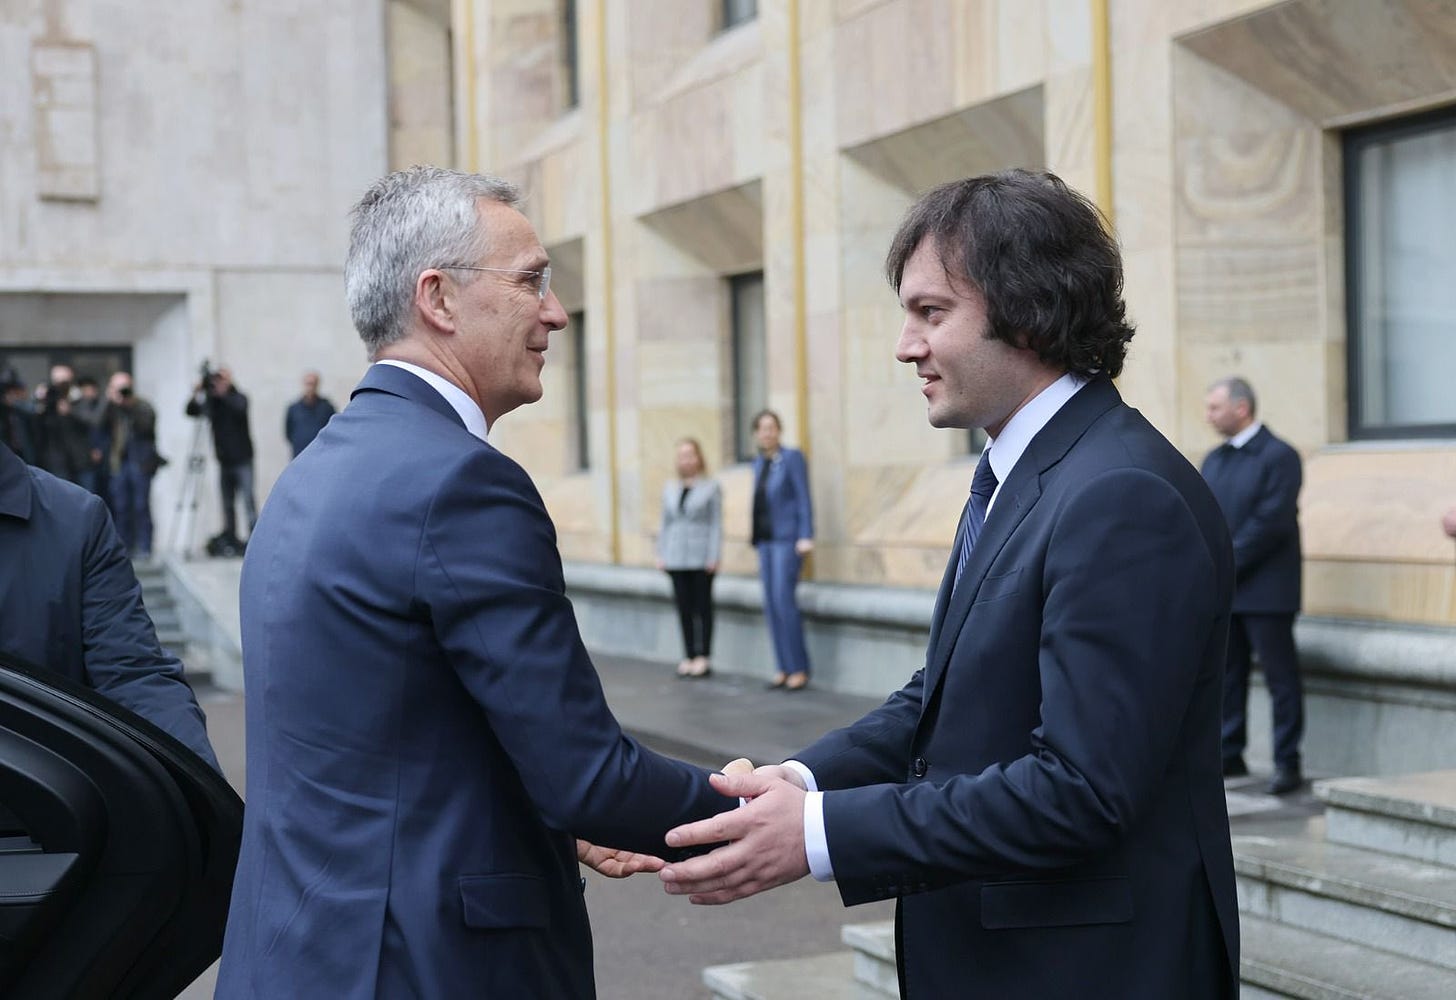 A person in suit shaking hands with another person in the background

Description automatically generated